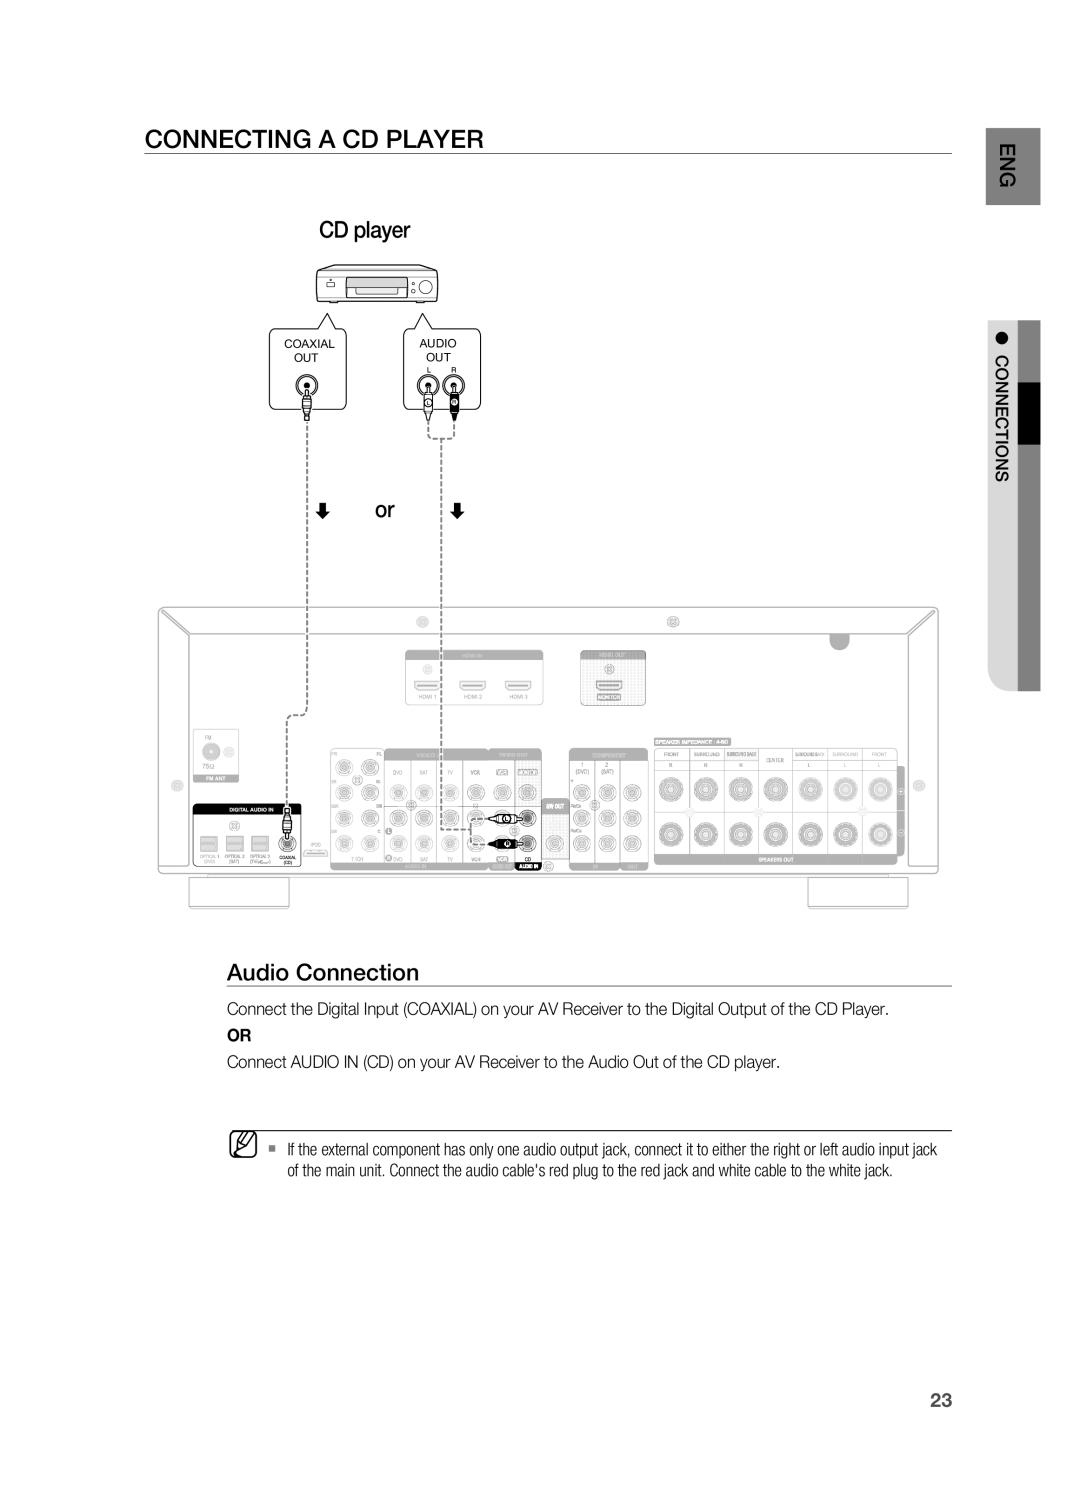 Samsung HT-AS730ST user manual Connecting a CD player, or Audio Connection 